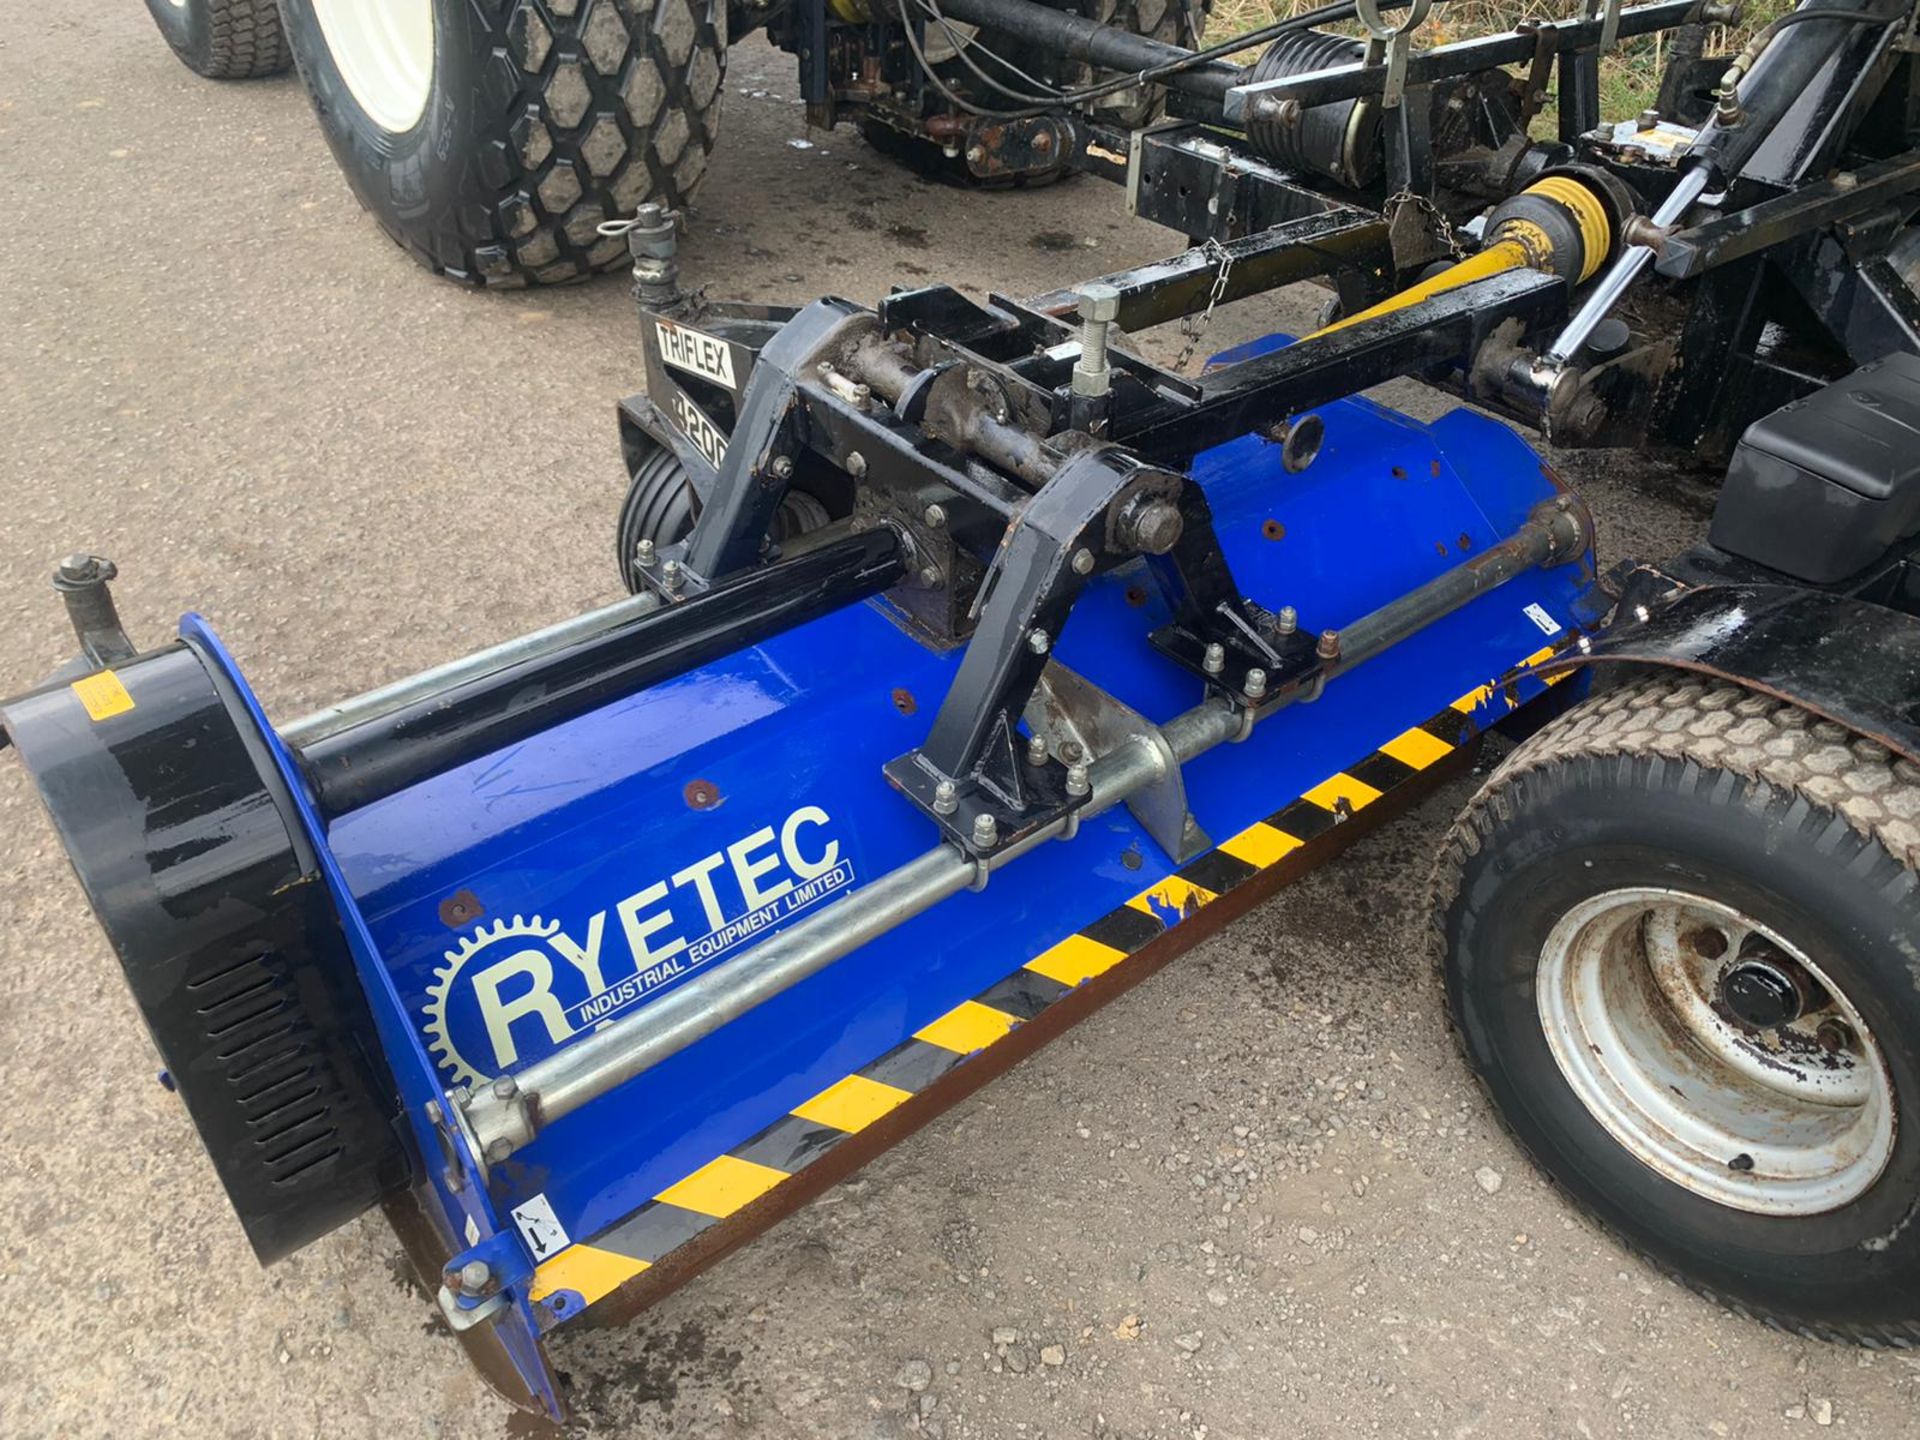 RYETEC TRIFLEX 4200 TOWBEHIND FLAIL 3 GANG MOWER, IN WORKING ORDER, PTO DRIVEN *PLUS VAT* - Image 9 of 15